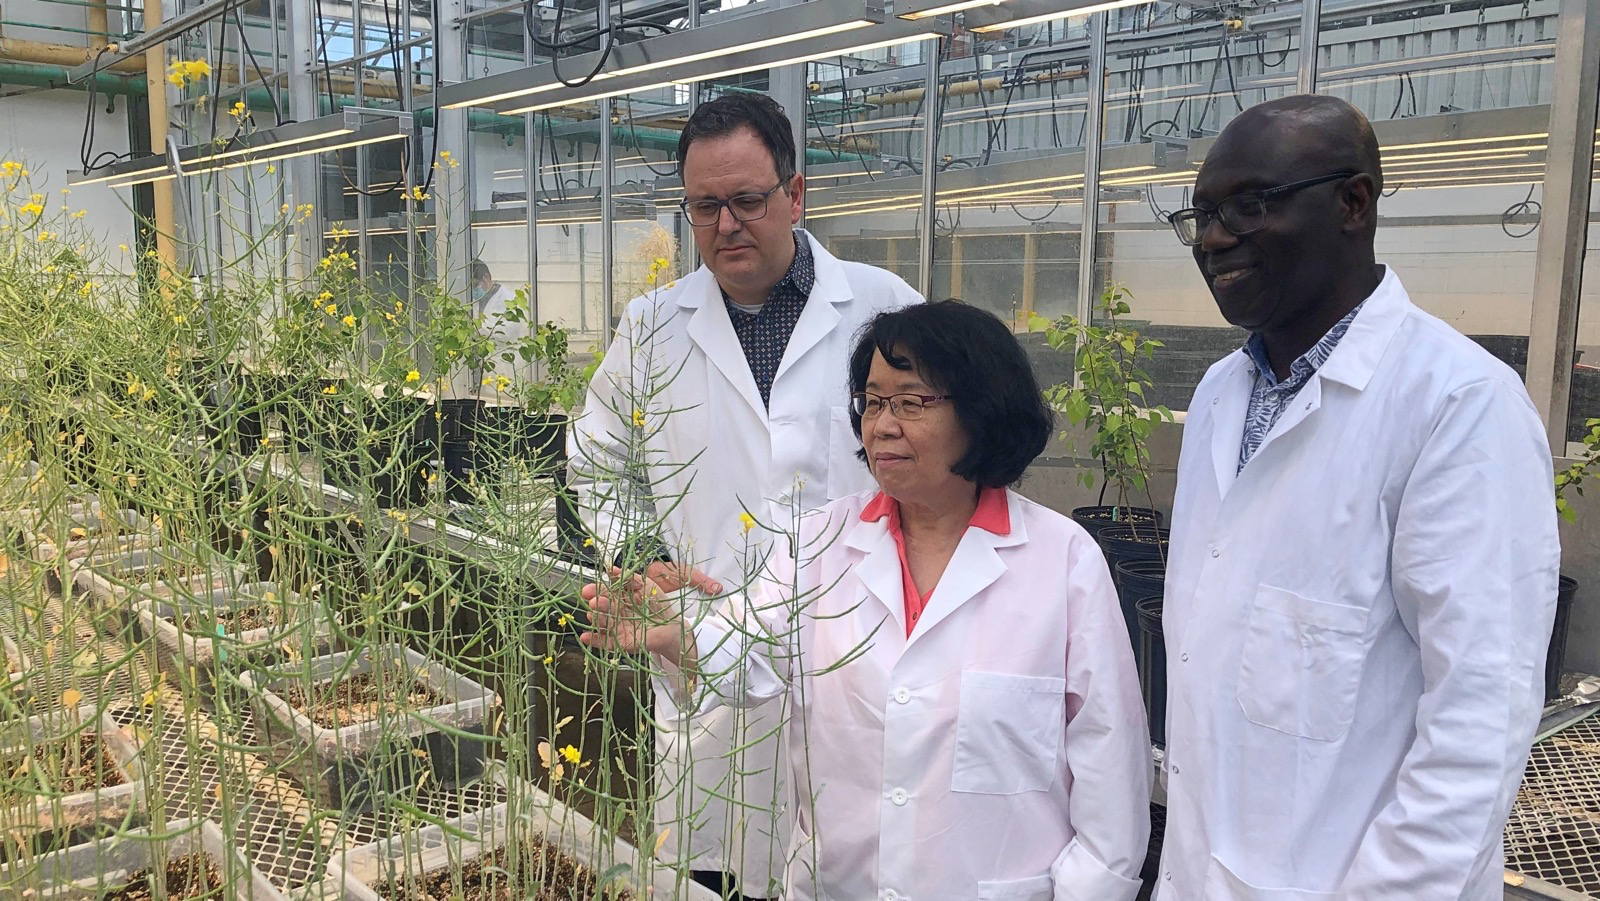 Three researchers observing plants growing in a greenhouse.